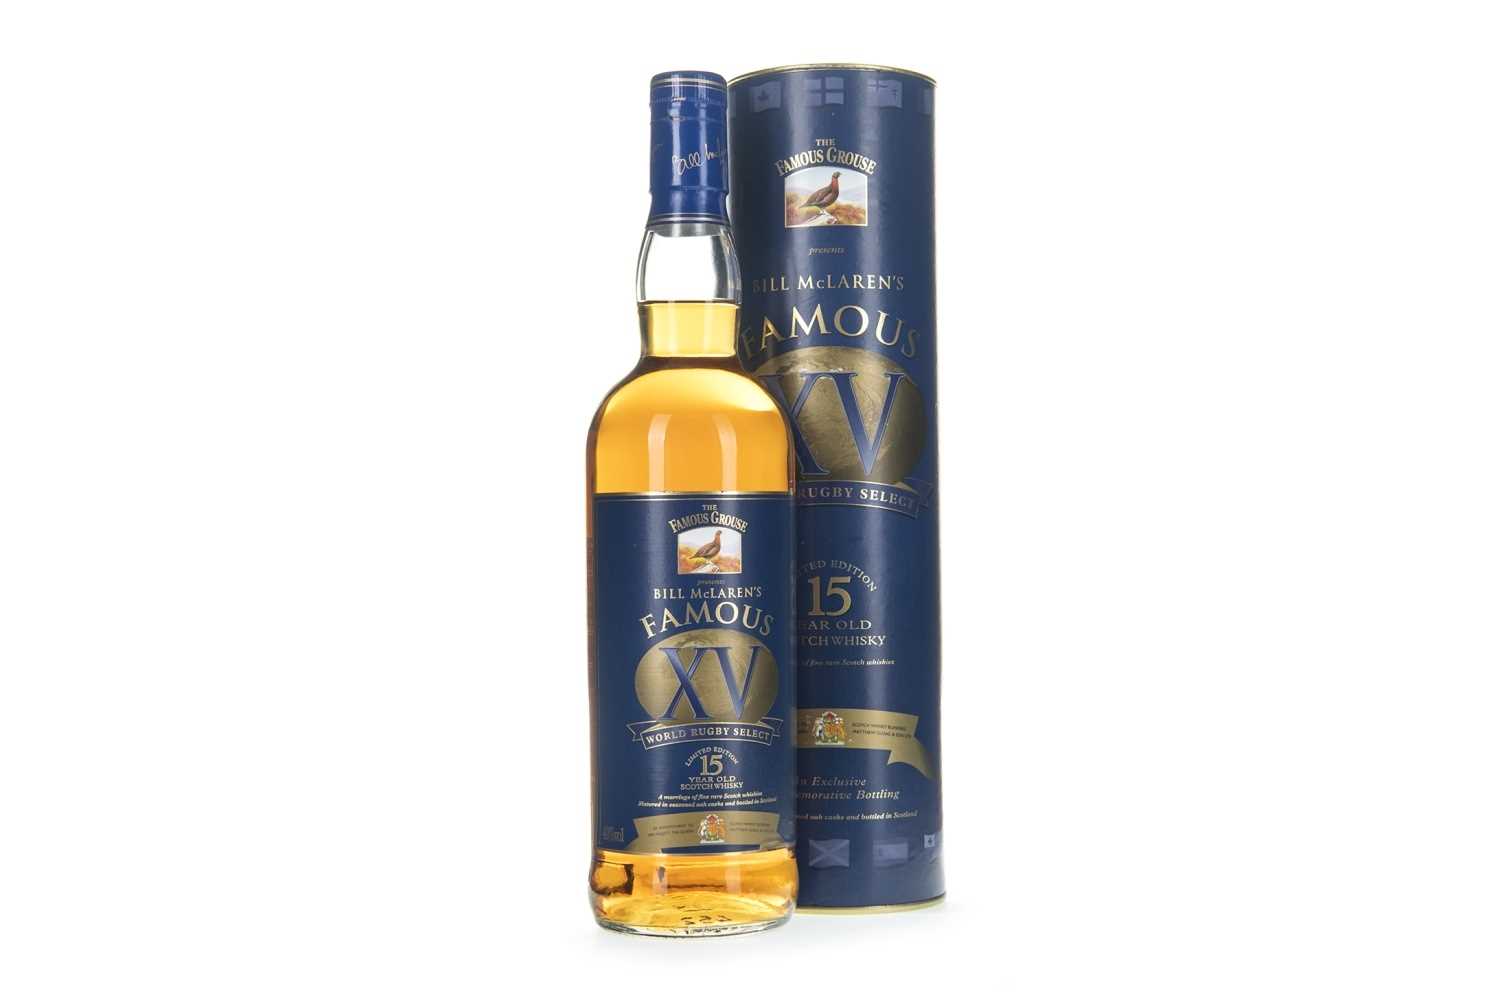 Lot 430 - FAMOUS GROUSE BILL MCLAREN'S FAMOUS XV 15 YEARS OLD